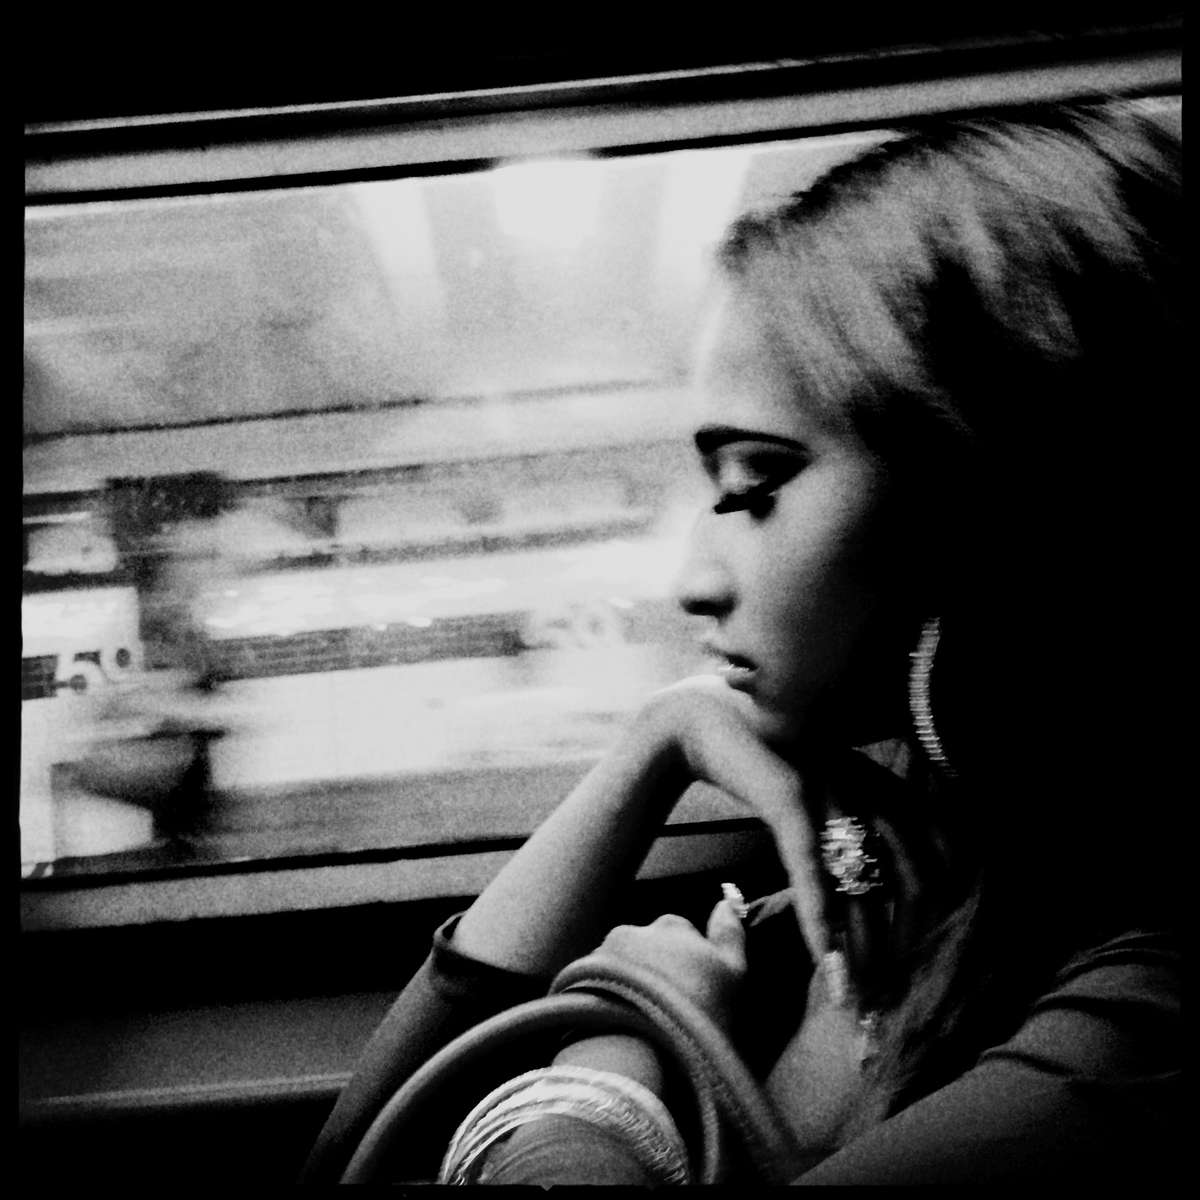 A woman in ennui at a New York subway train bound for Harlem and Bronx.